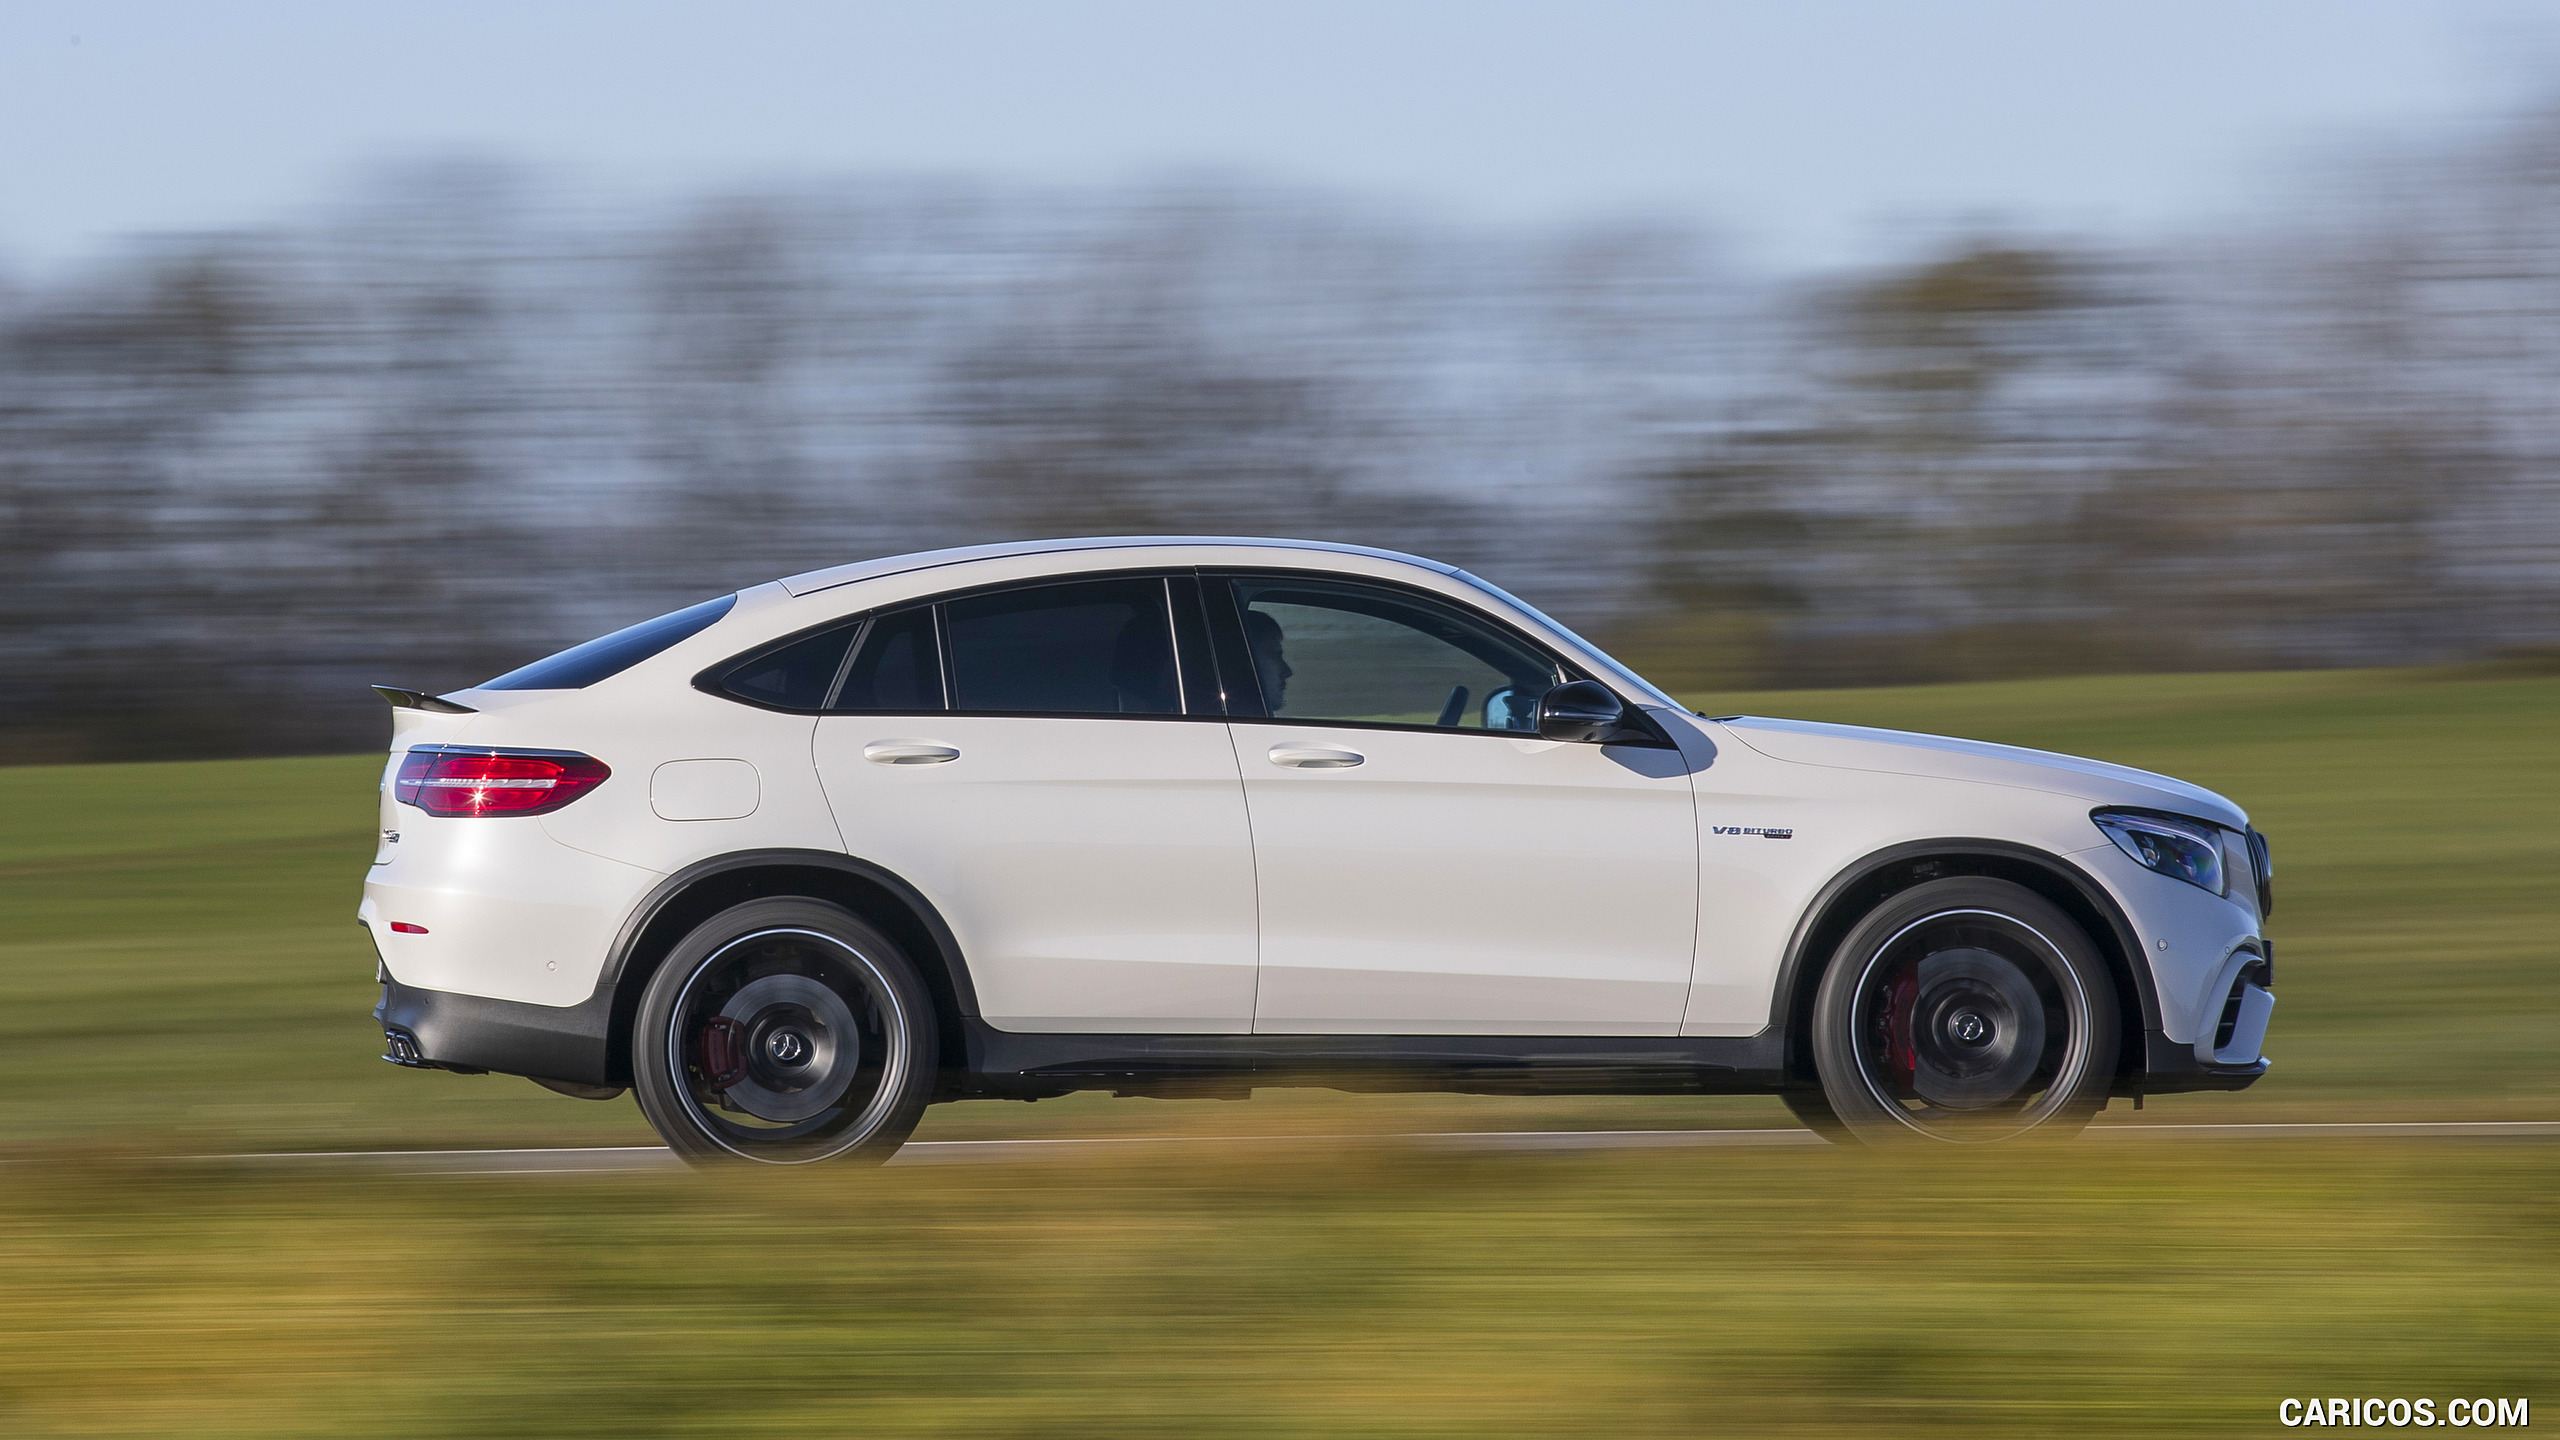 2018 Mercedes-AMG GLC 63 S Coupe - Side, #35 of 75